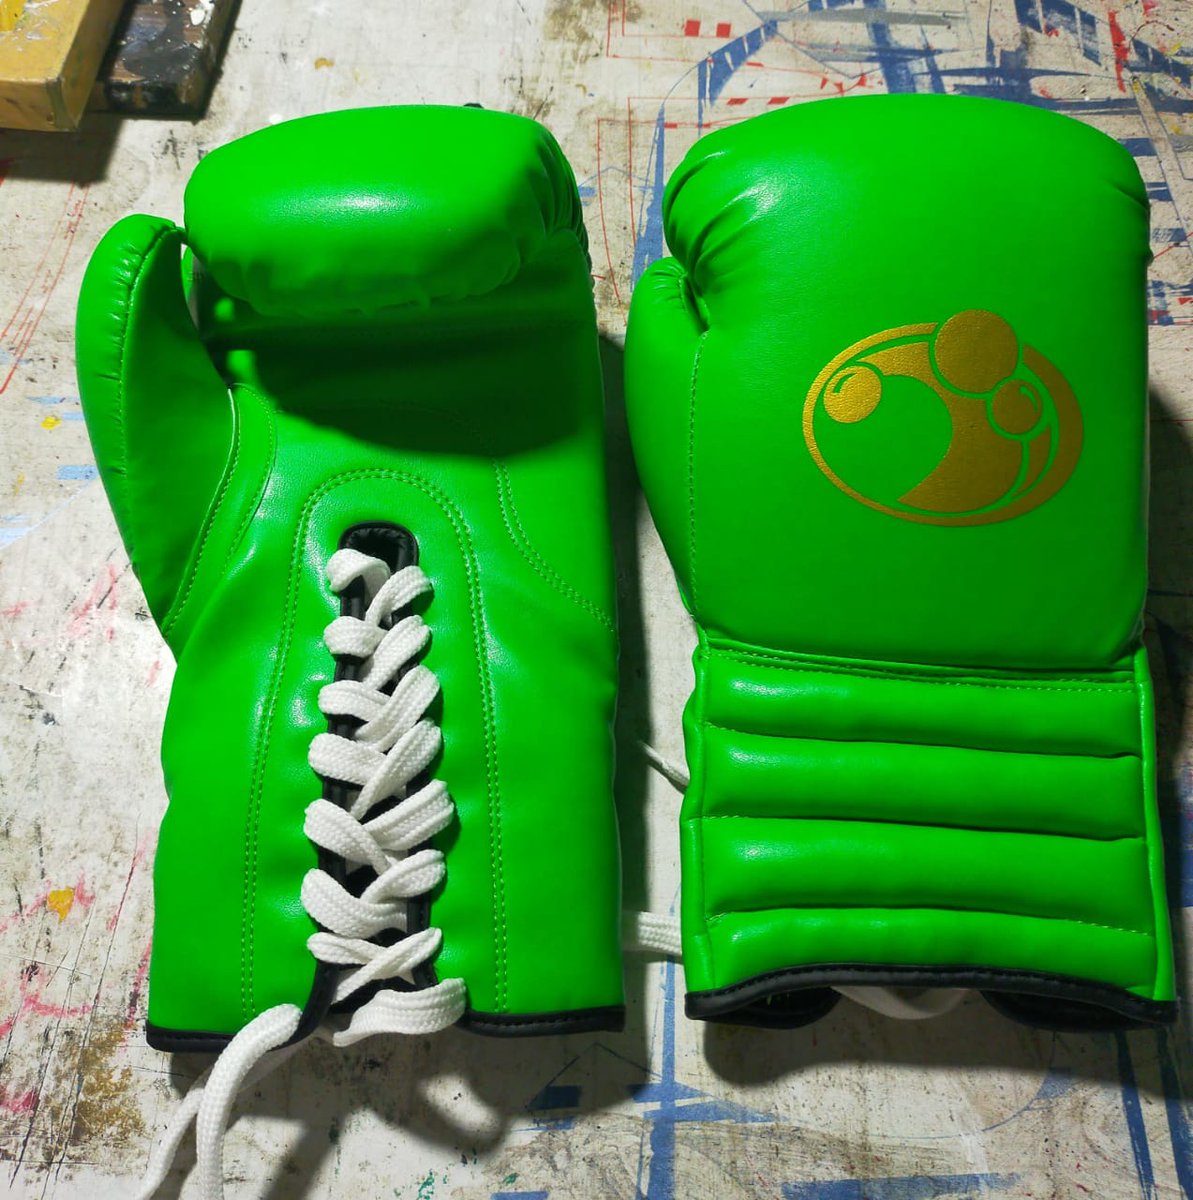 #boxinggloves #ribbongloves #bestquality #boxinggears #forsale #yourlogo #size #leathergloves #boxingstores #boxingfighters #foryou